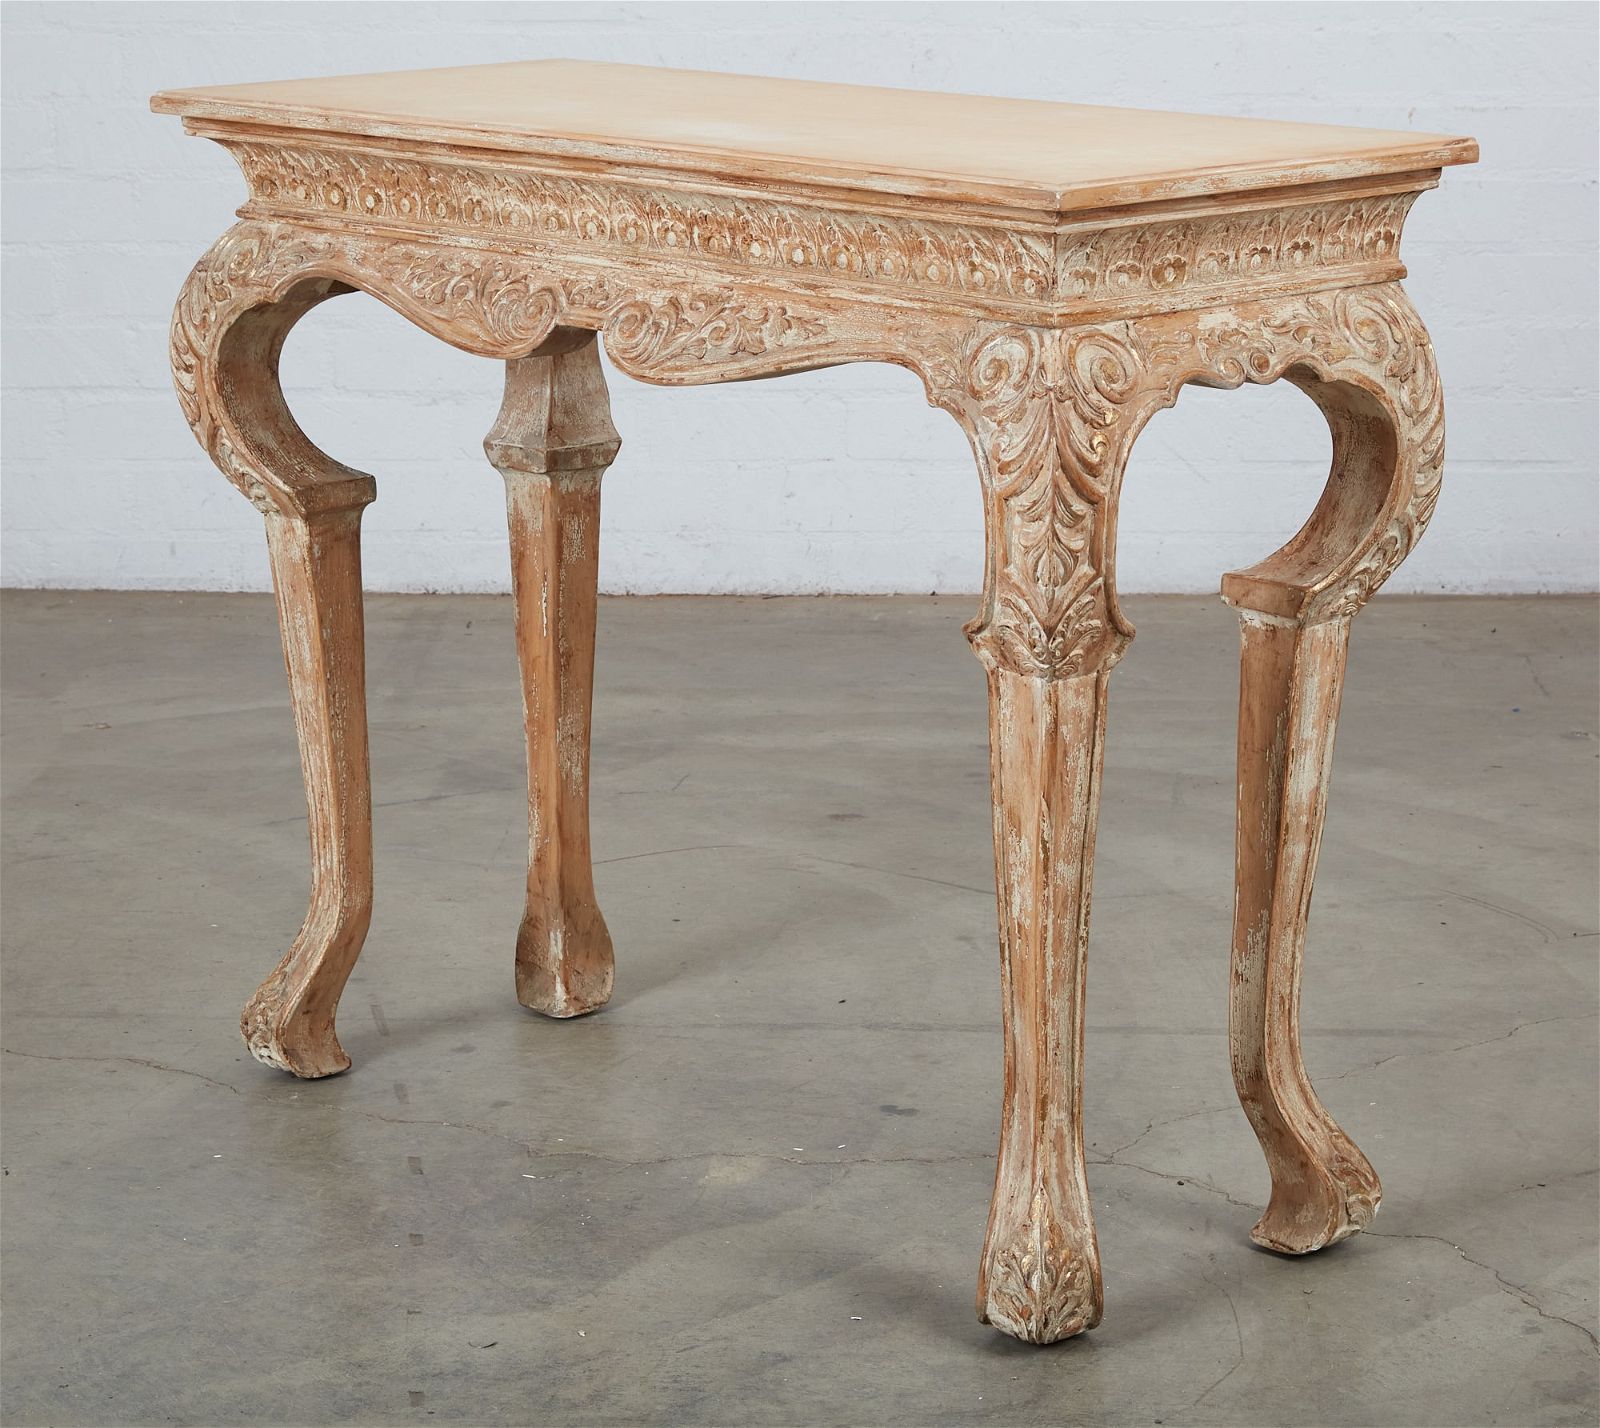 A LOUIS XVI STYLE CARVED CONSOLE